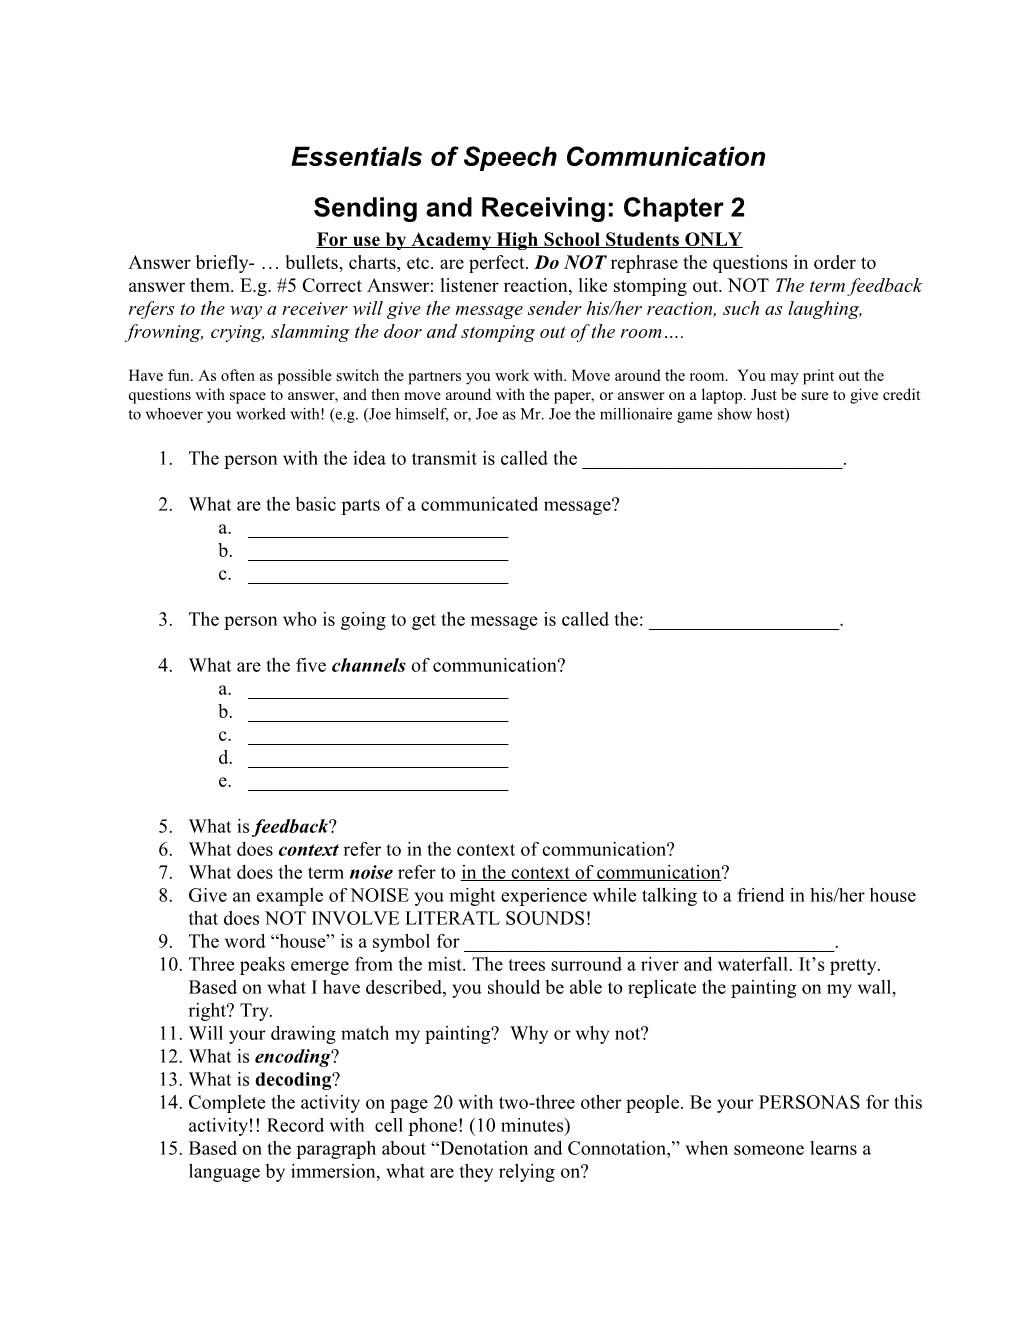 Sending and Receiving: Chapter 2